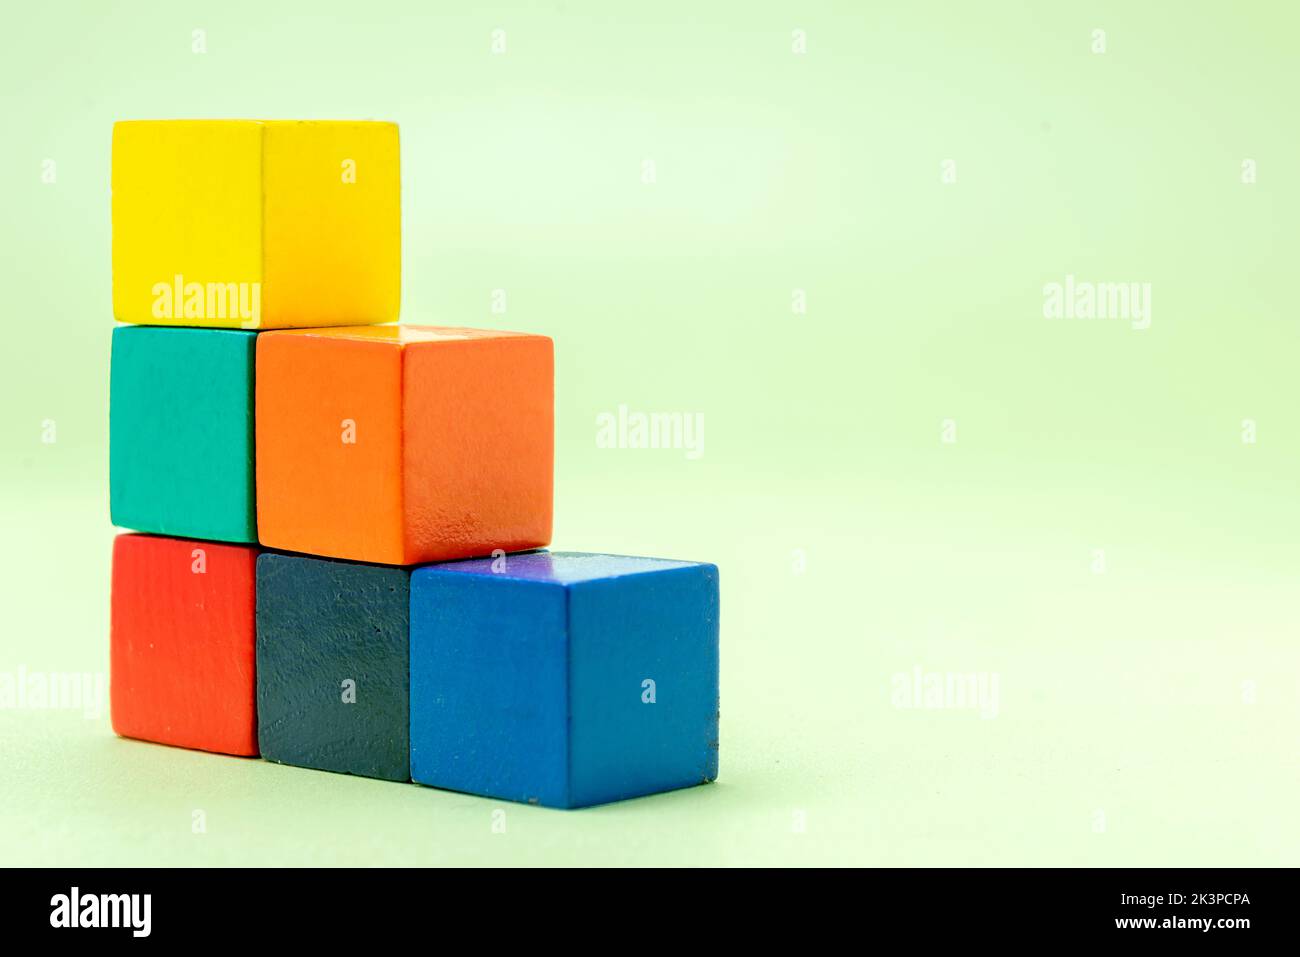 Stairs of colorful wooden block toys on a colored background Stock Photo